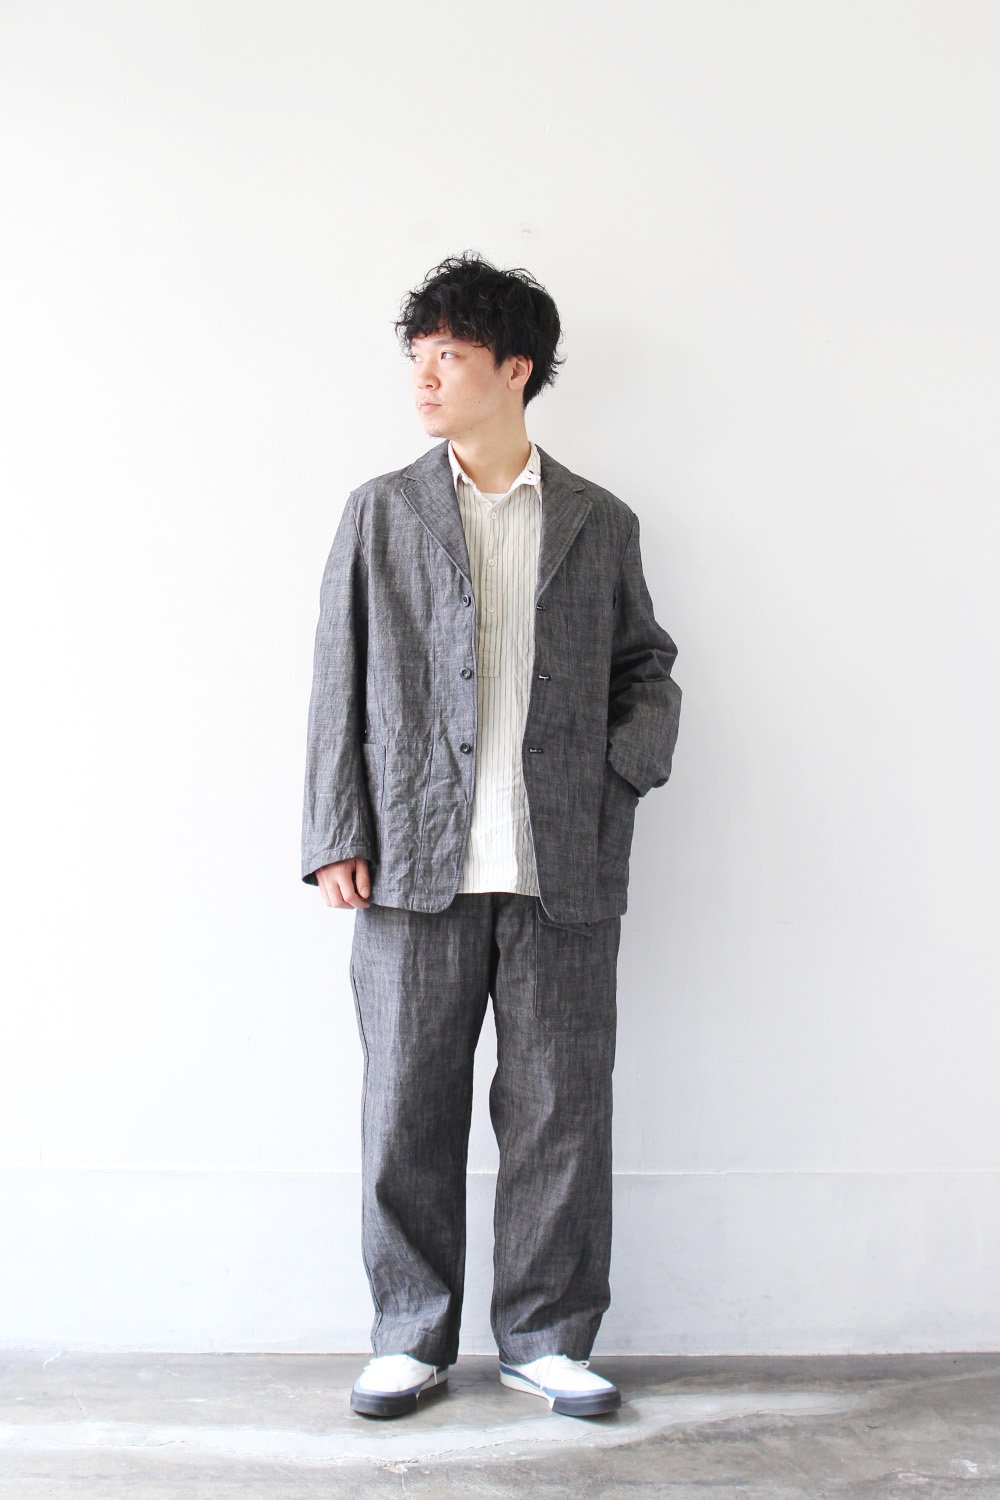 20th. Anv. Limited】British Mil. Easy Trousers - Bricklayer *A